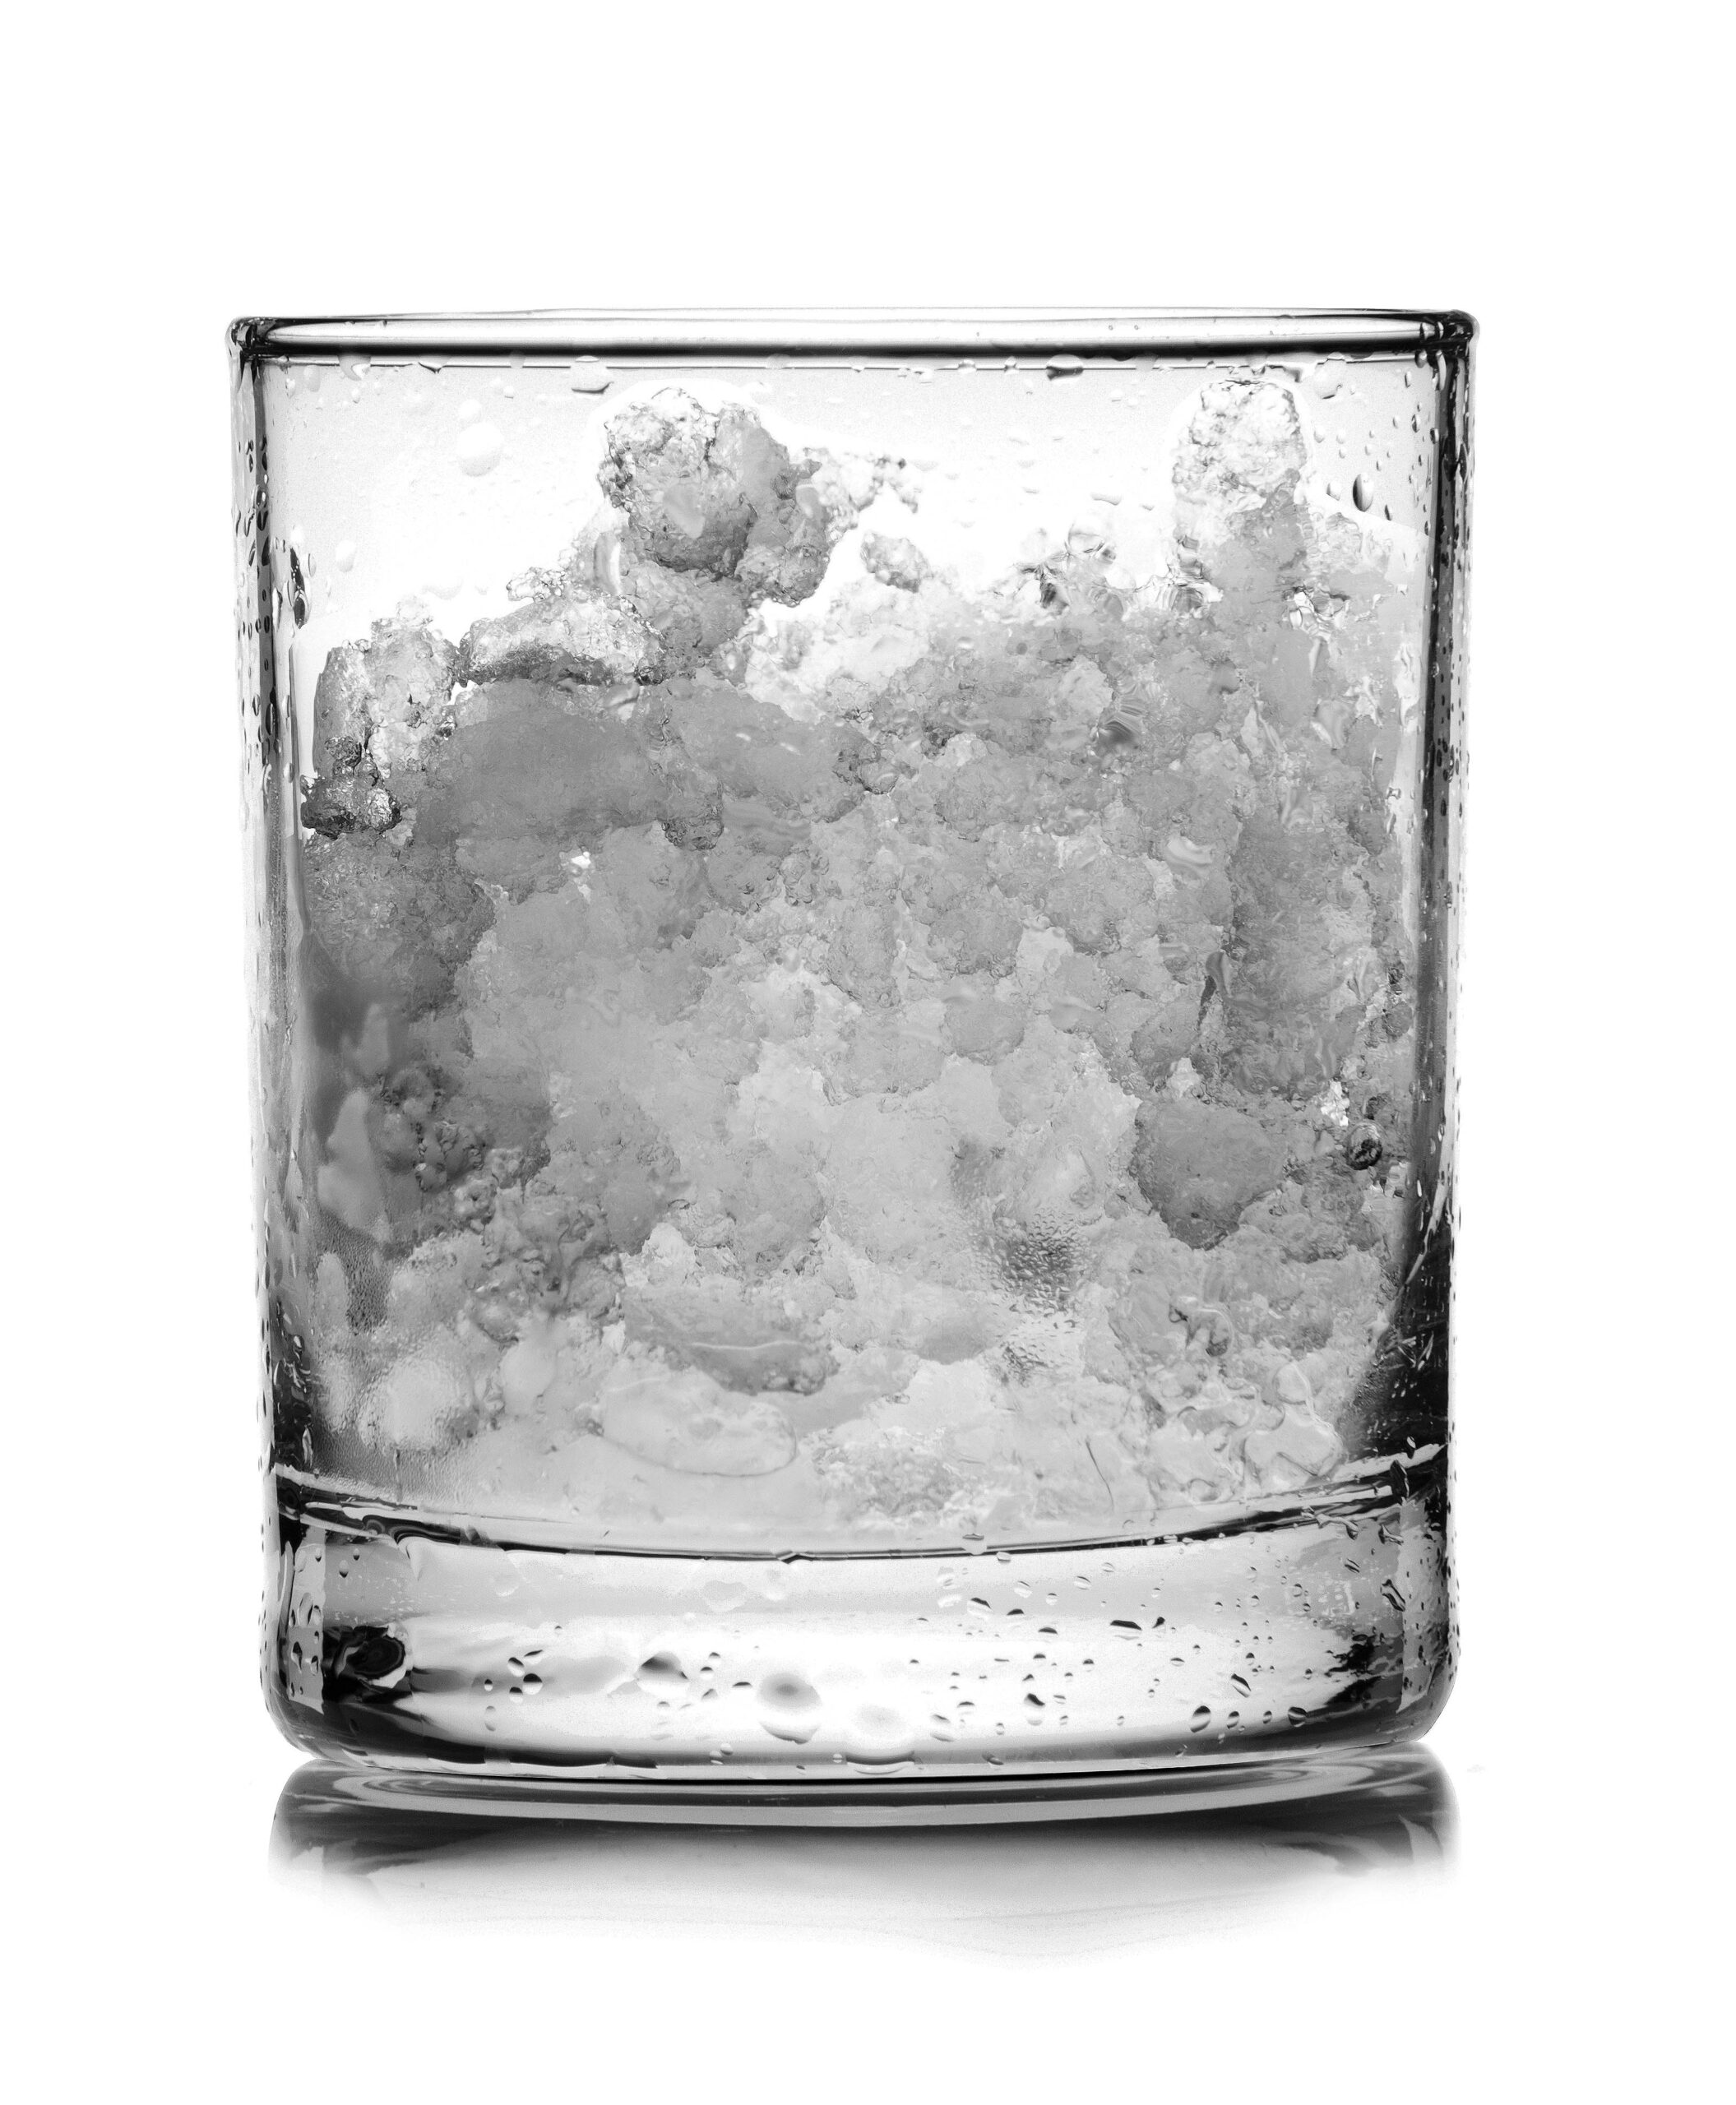 flake ice in a glass